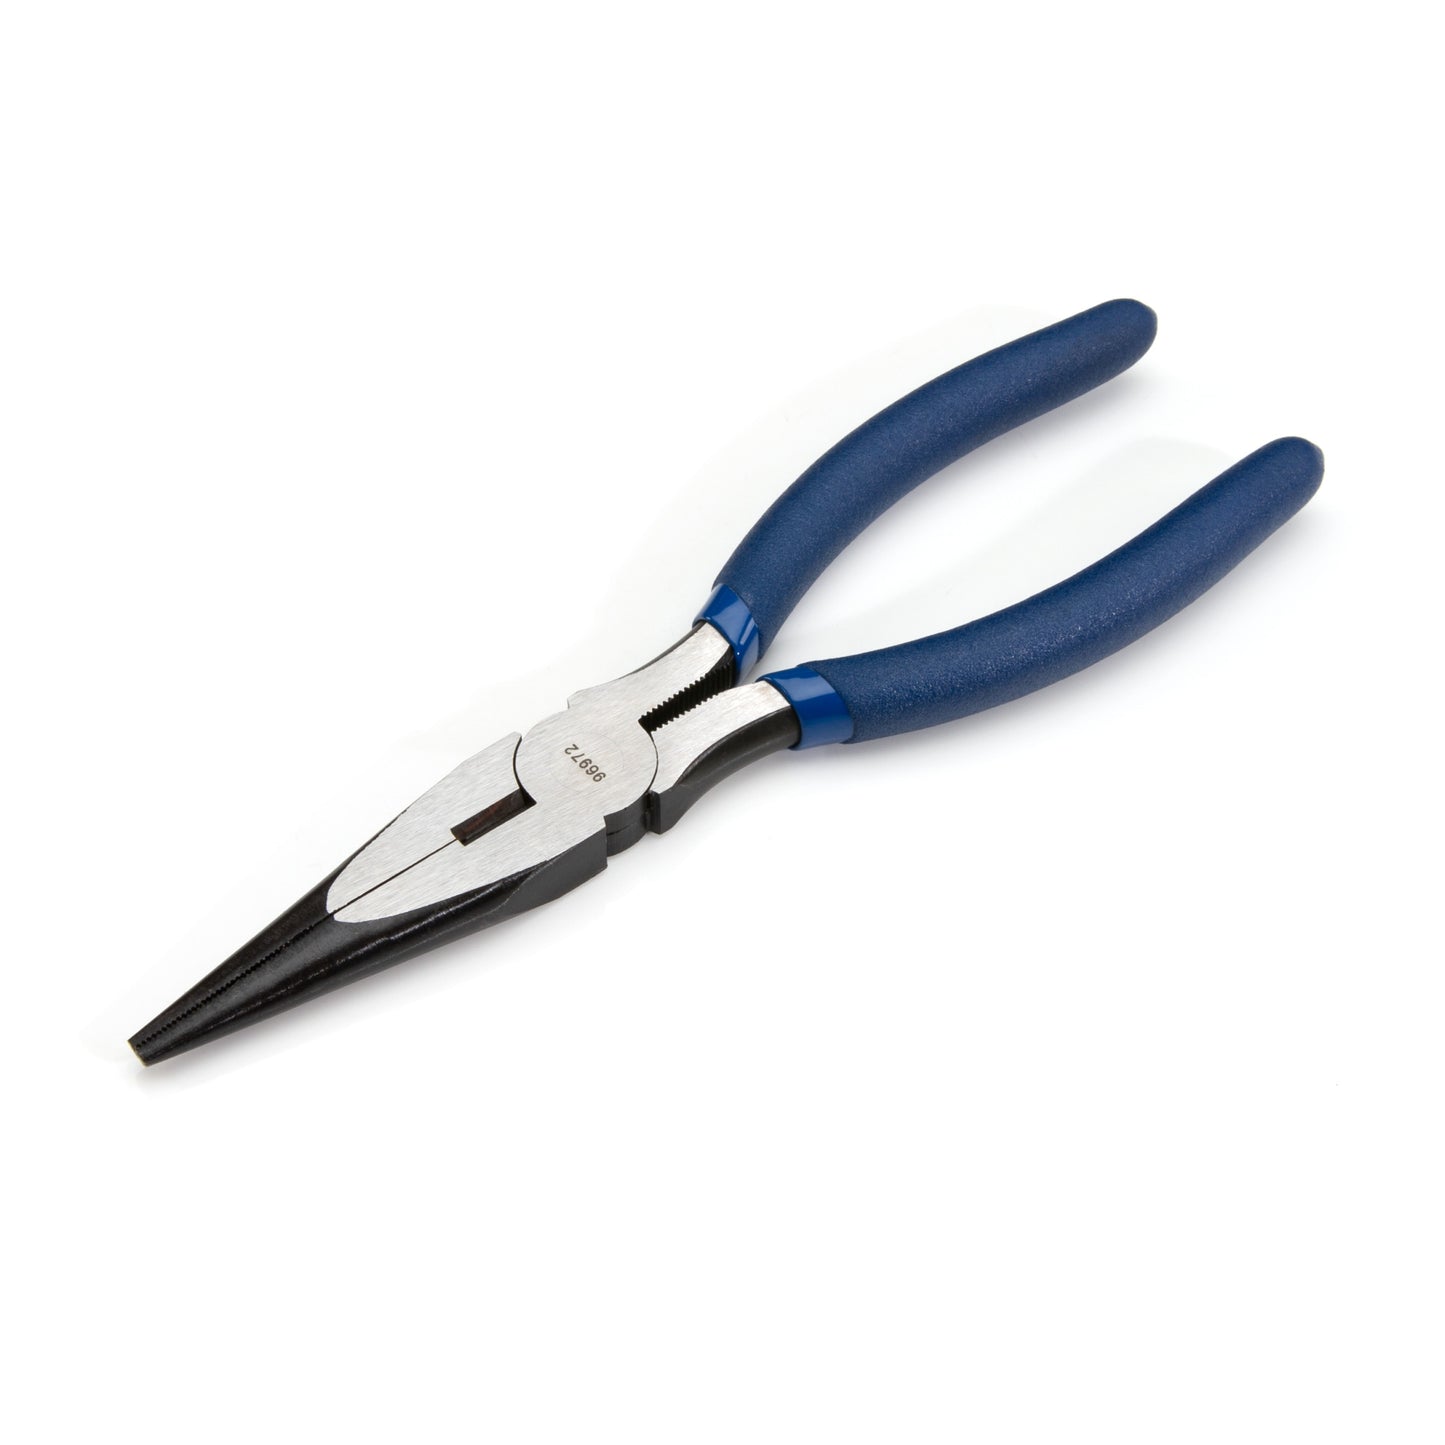 8-Inch Long Needle Nose Pliers with Wire Cutter